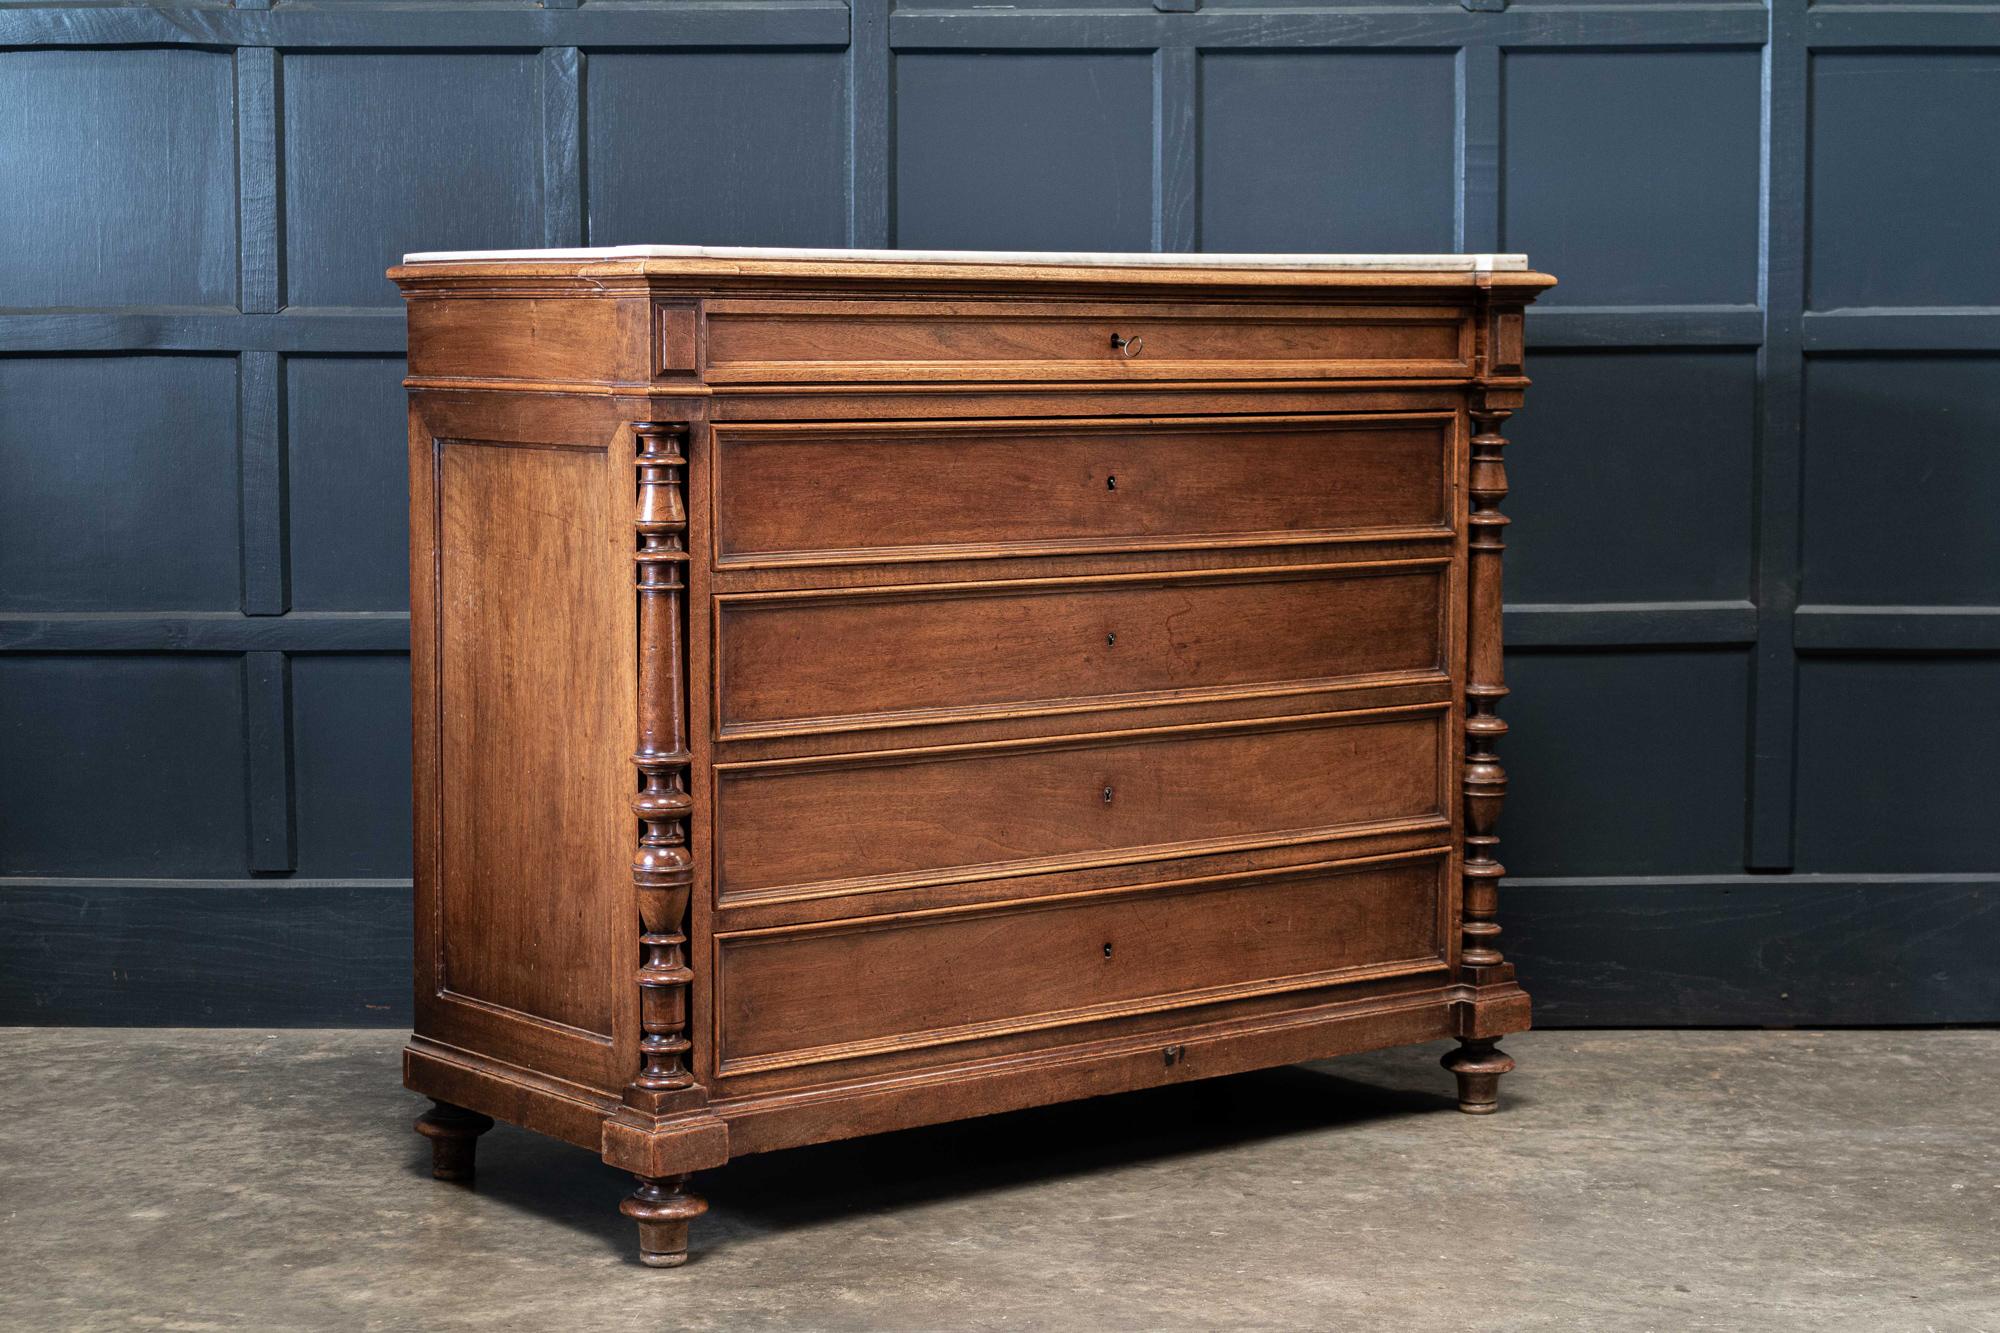 Circa 1880.

19thc French walnut & carrara marble commode
Excellent patination and colour with original key.

Sourced from the South of France

 

Measures: W130 x D53.5 x H104cm.
  